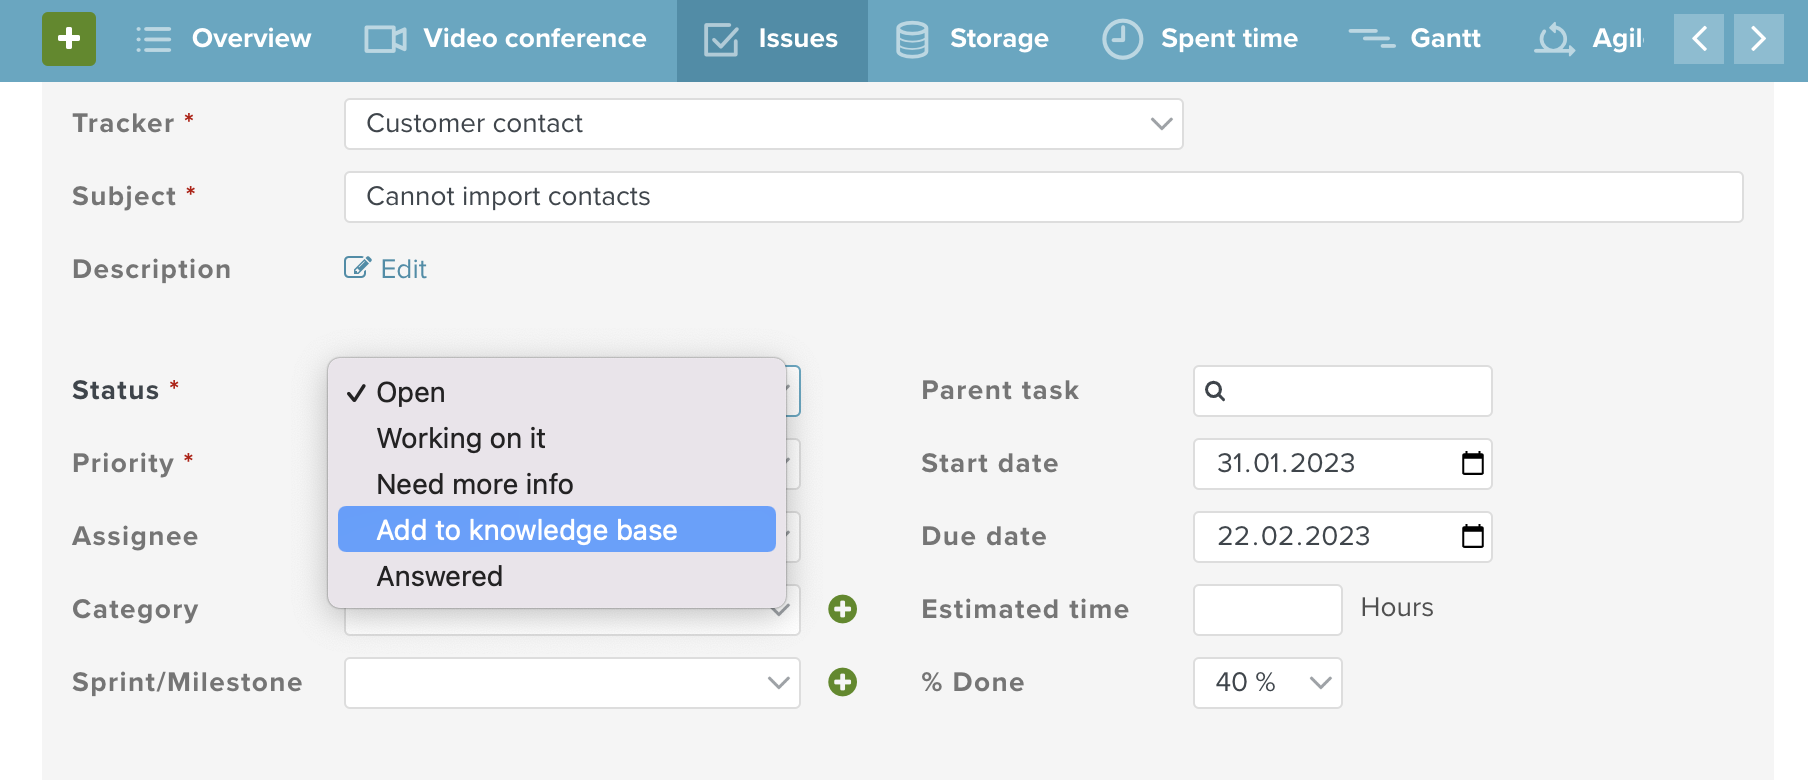 Collect issues that need to be added to the knowledge base